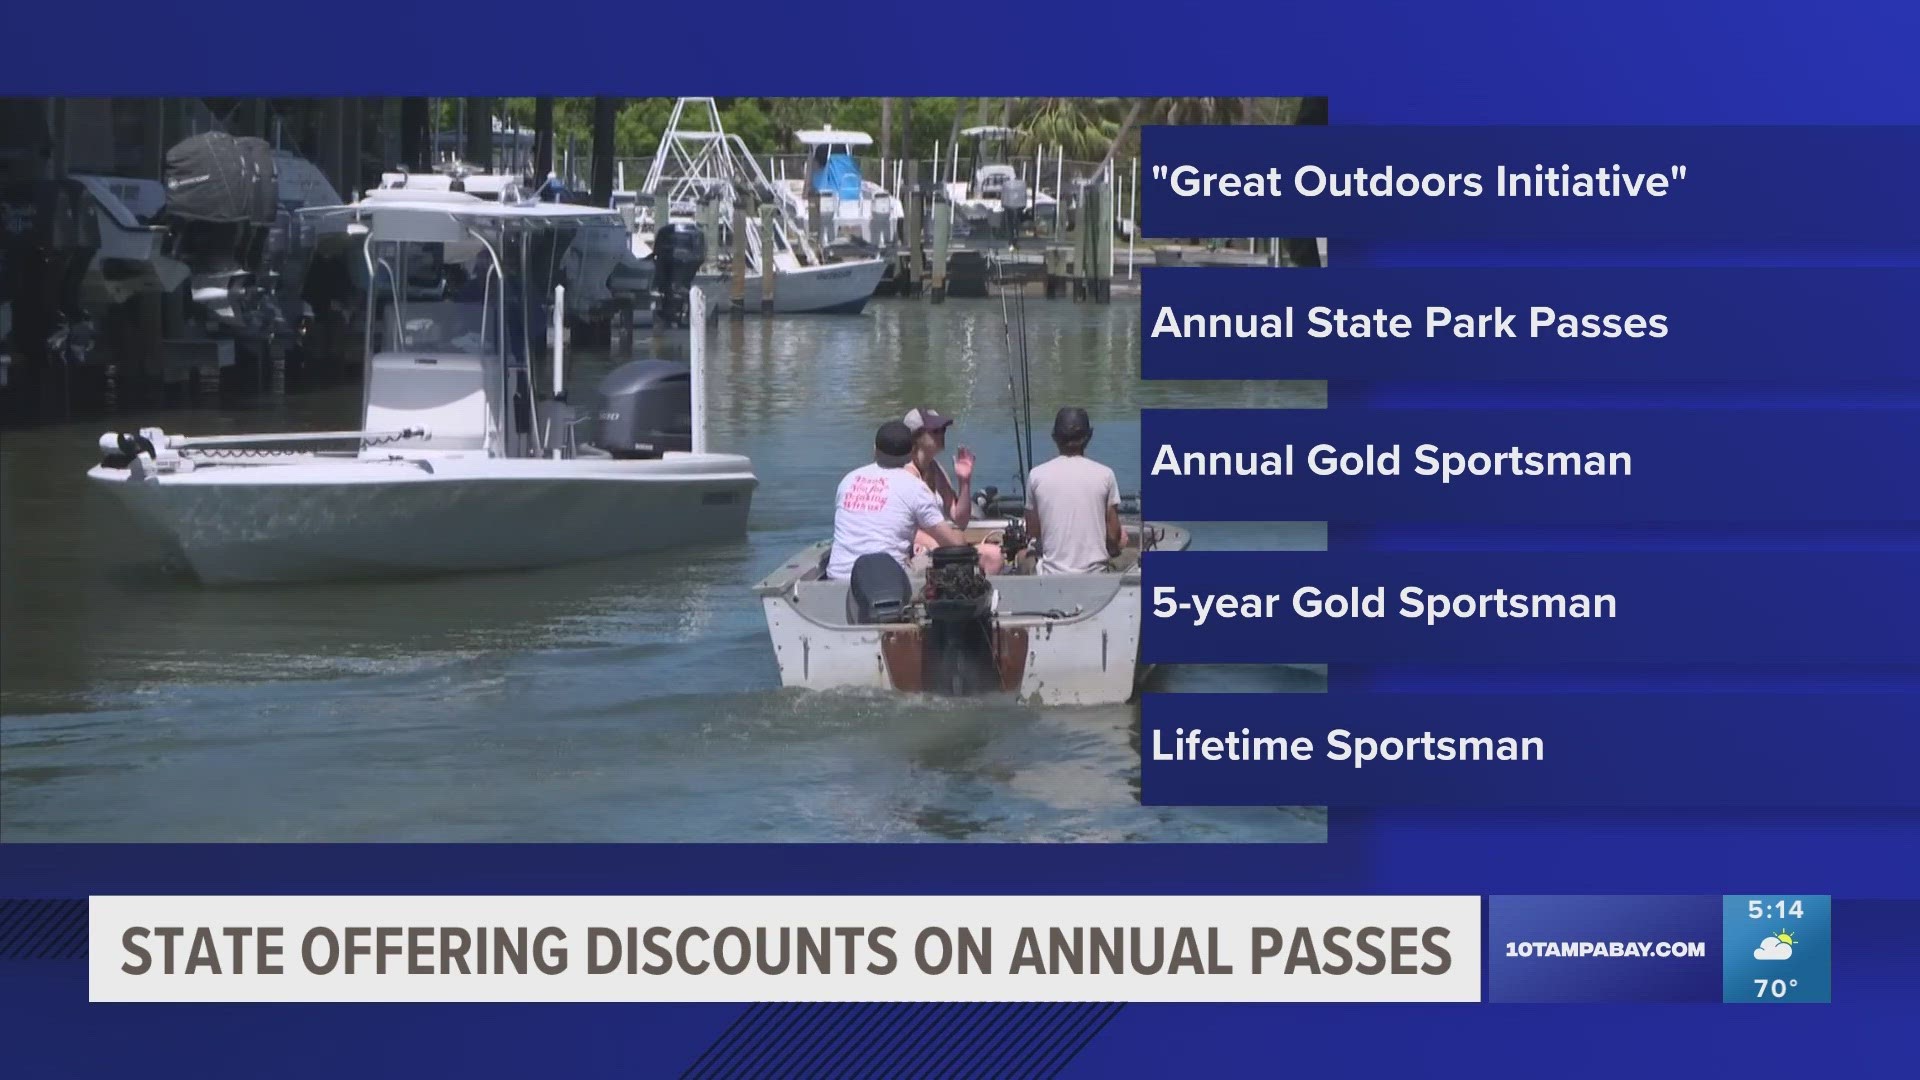 Over the next three months, annual passes to the state parks and fishing licenses will be discounted.